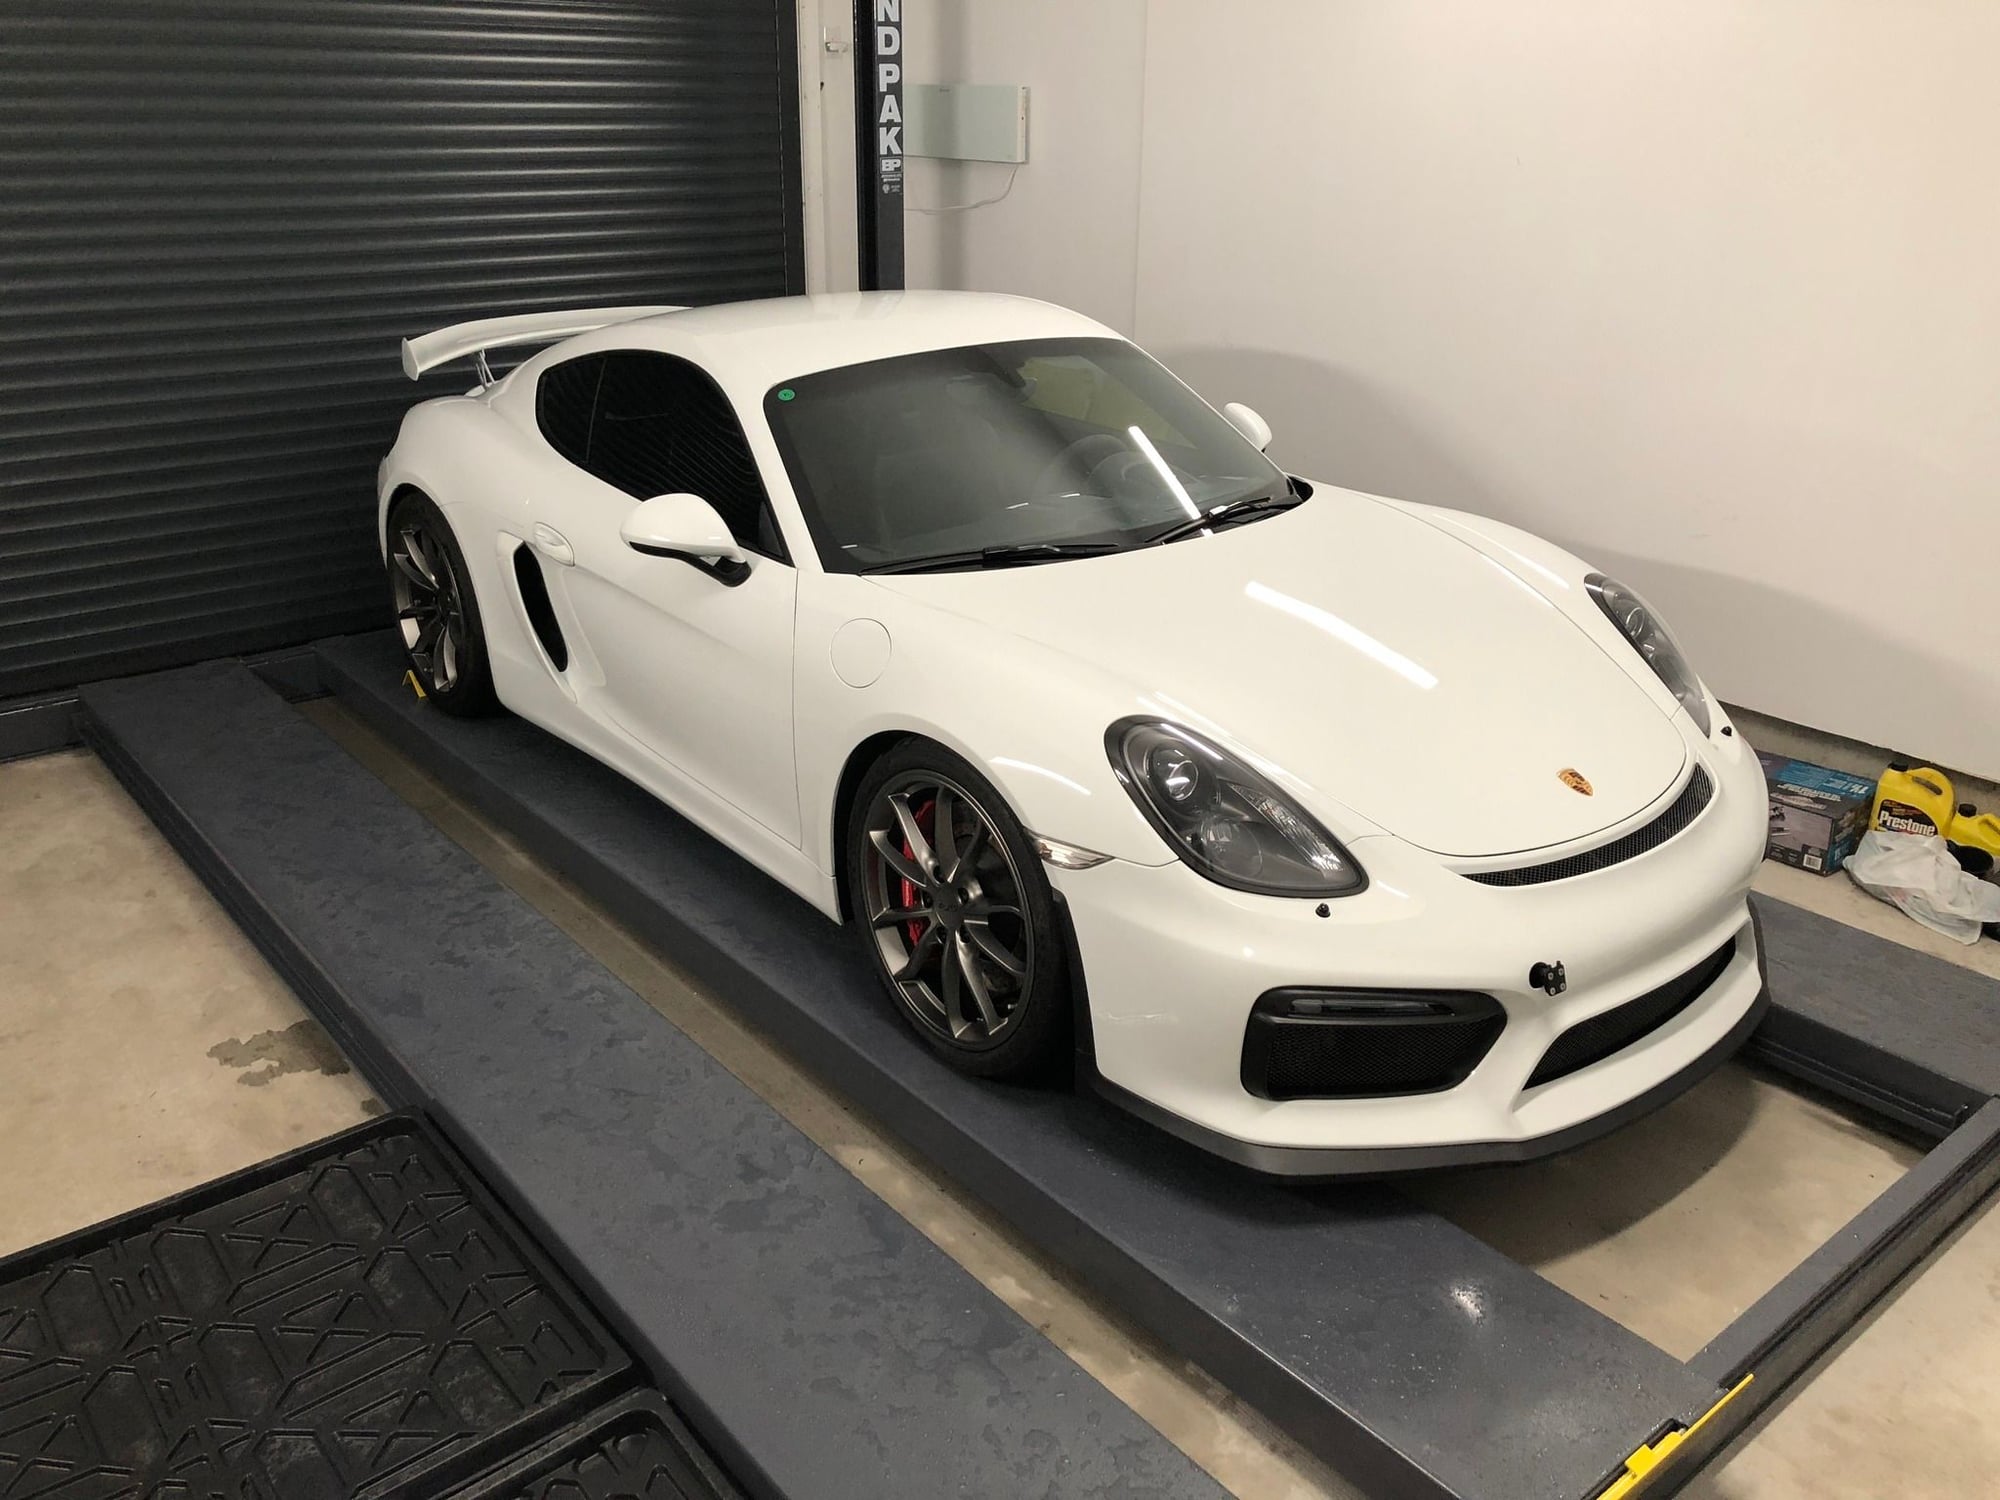 2016 Porsche Cayman GT4 - 2016 Cayman GT4 (white, LWB, full XPEL, unmodified) - Used - VIN WP0AC2A85GK197158 - 10,500 Miles - 6 cyl - 2WD - Manual - Coupe - White - Ottawa, ON K1V7G1, Canada